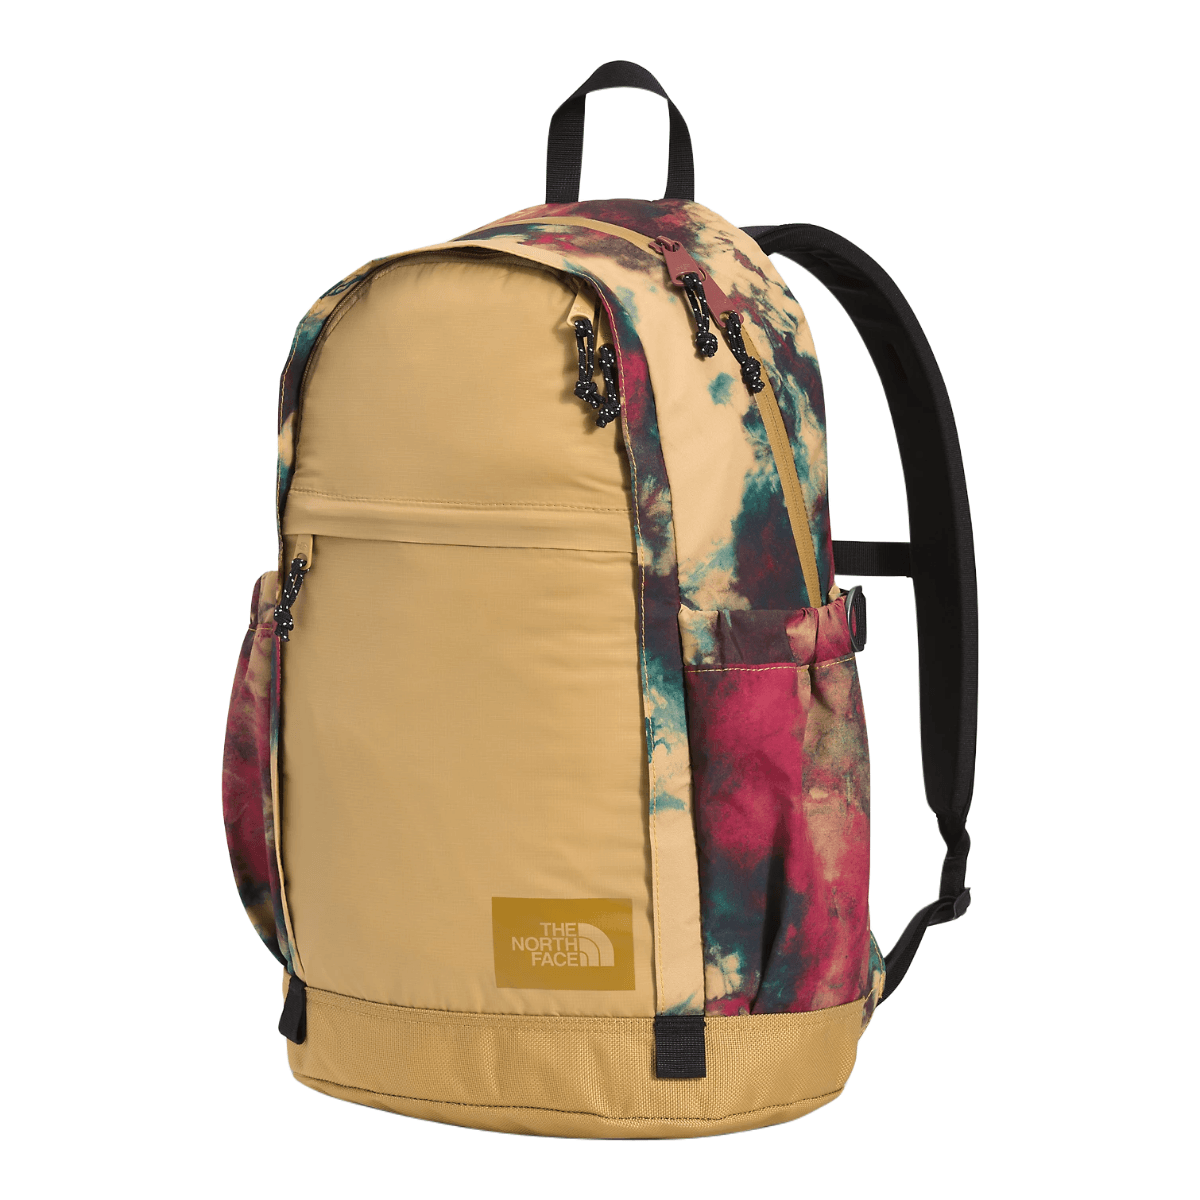 The North Face Mountain 20L Daypack - Als.com